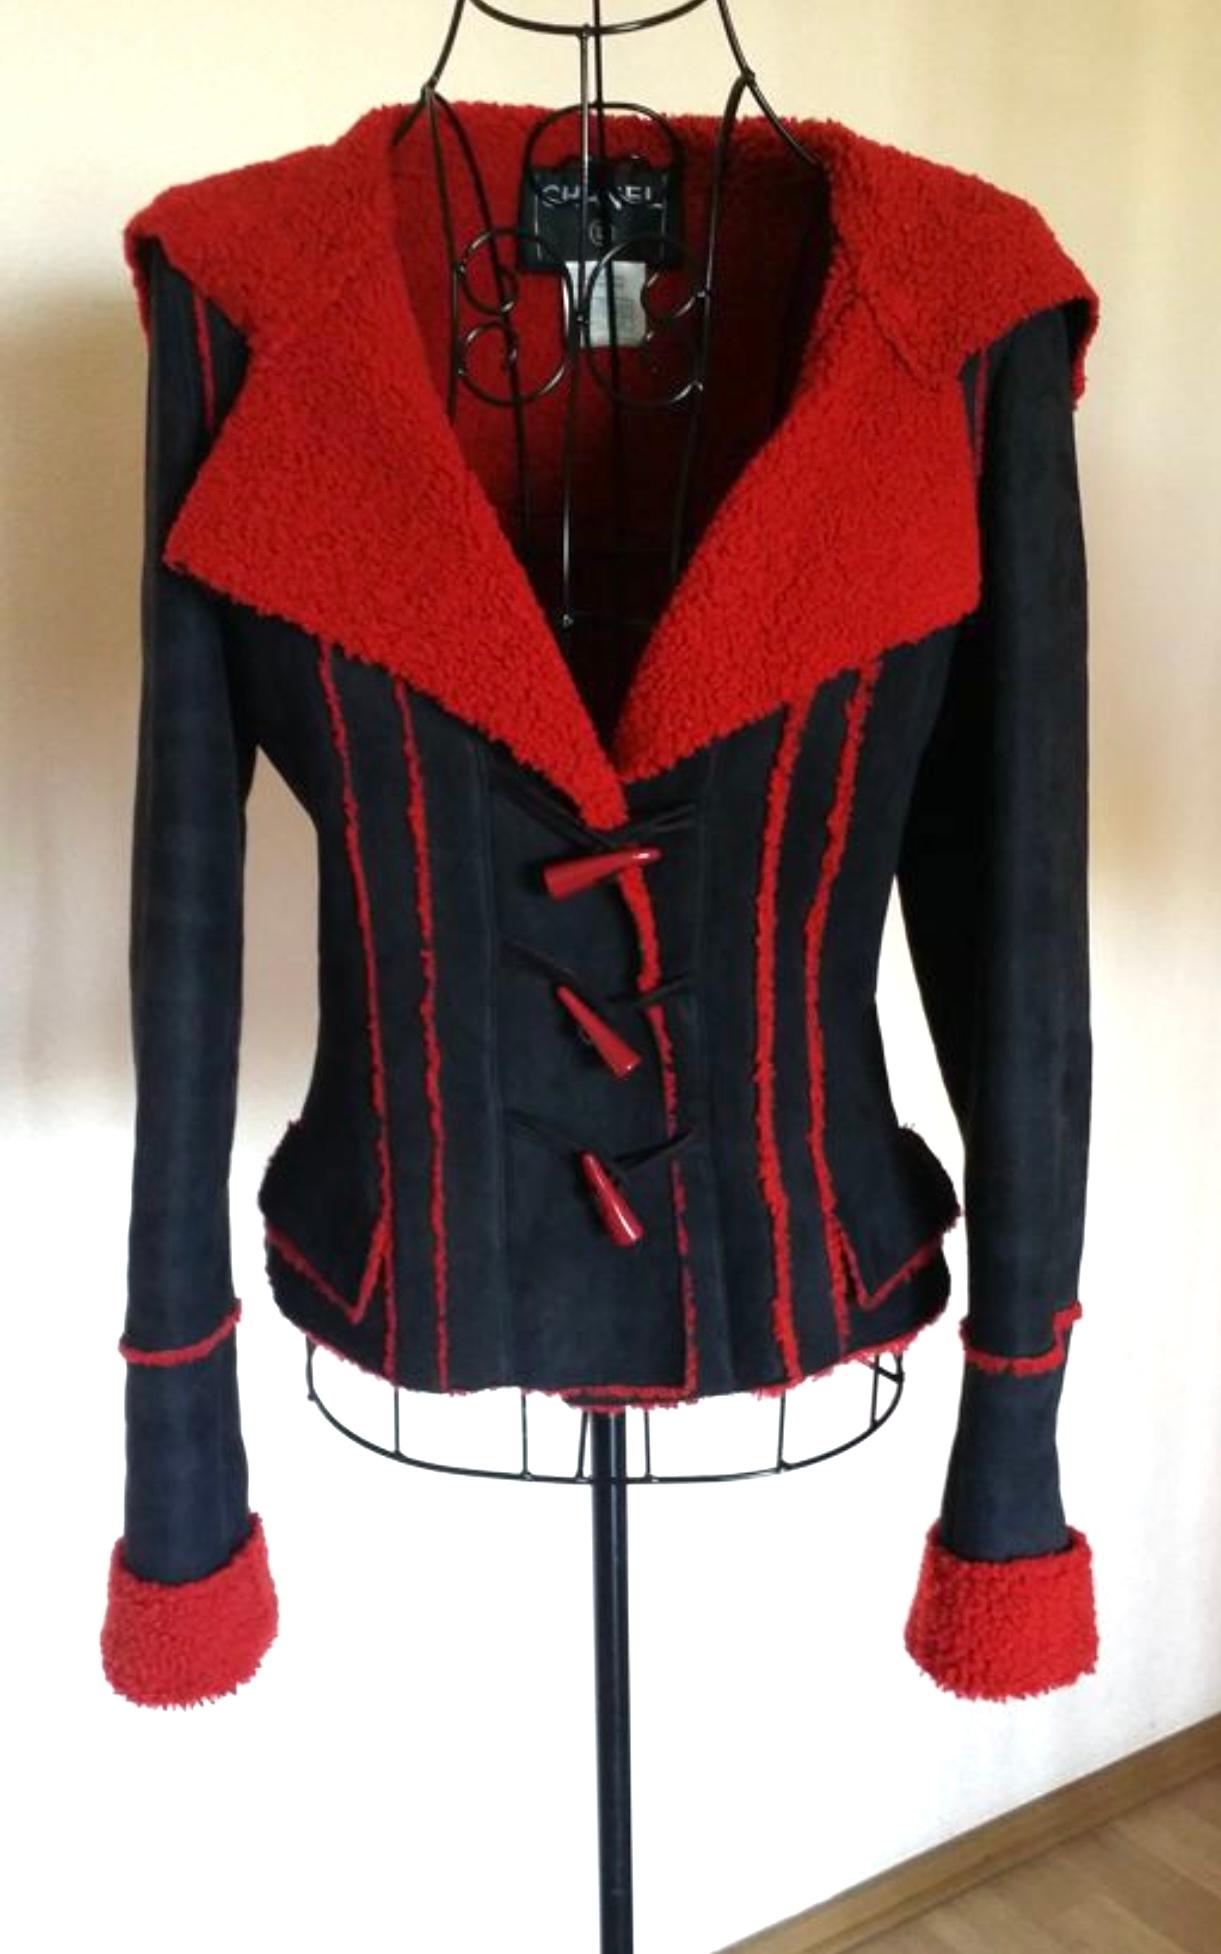 Collectible Chanel black and red shearling jacket with CC logo duffle closures.
Elegant and timeless colour combination!
Size mark 36 FR. Excellent condition, only tried once!